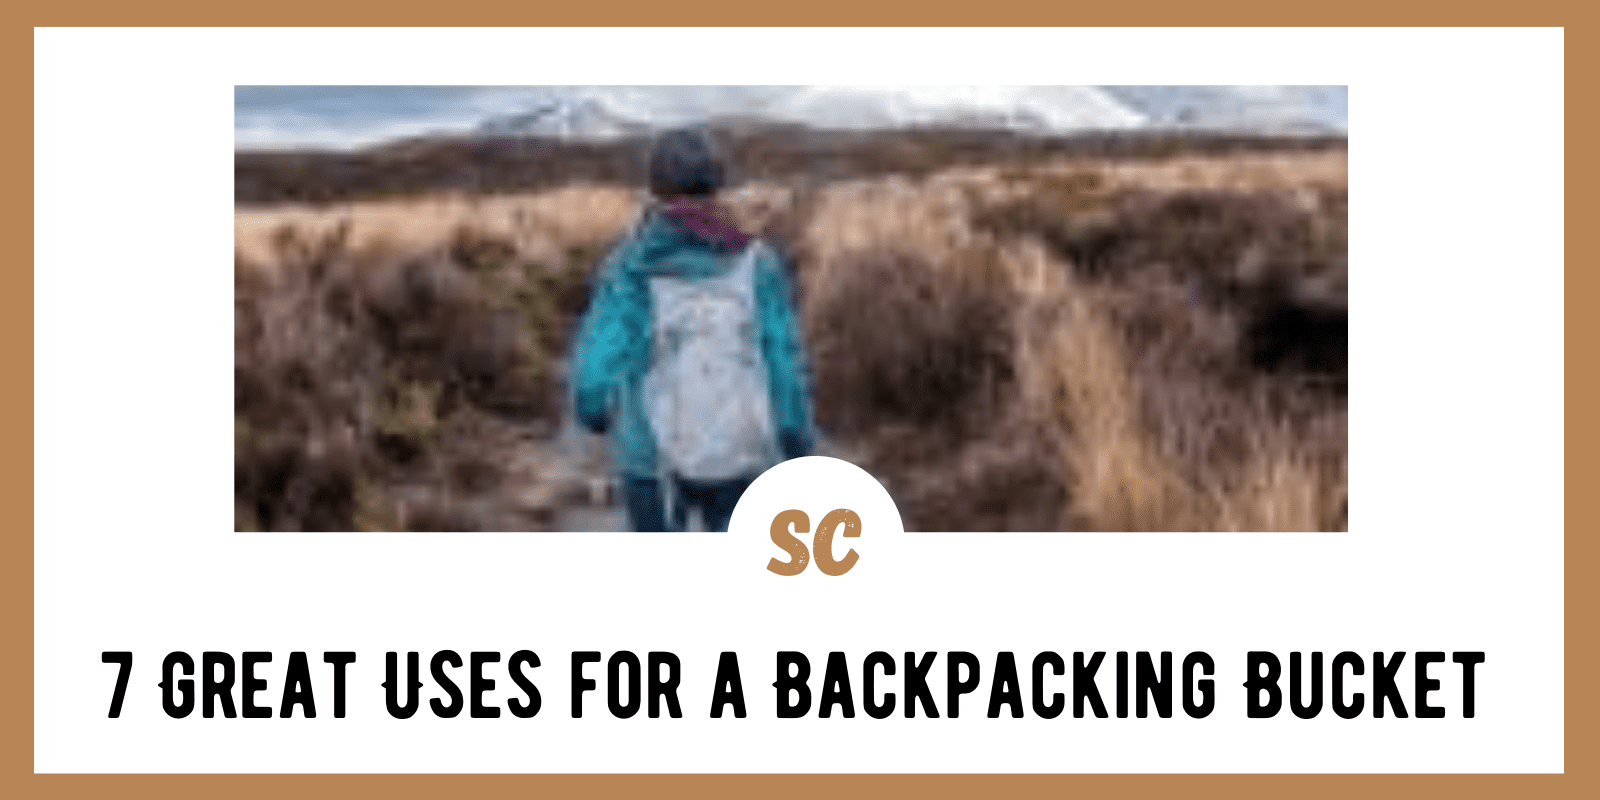 7 Great Uses for a Backpacking Bucket